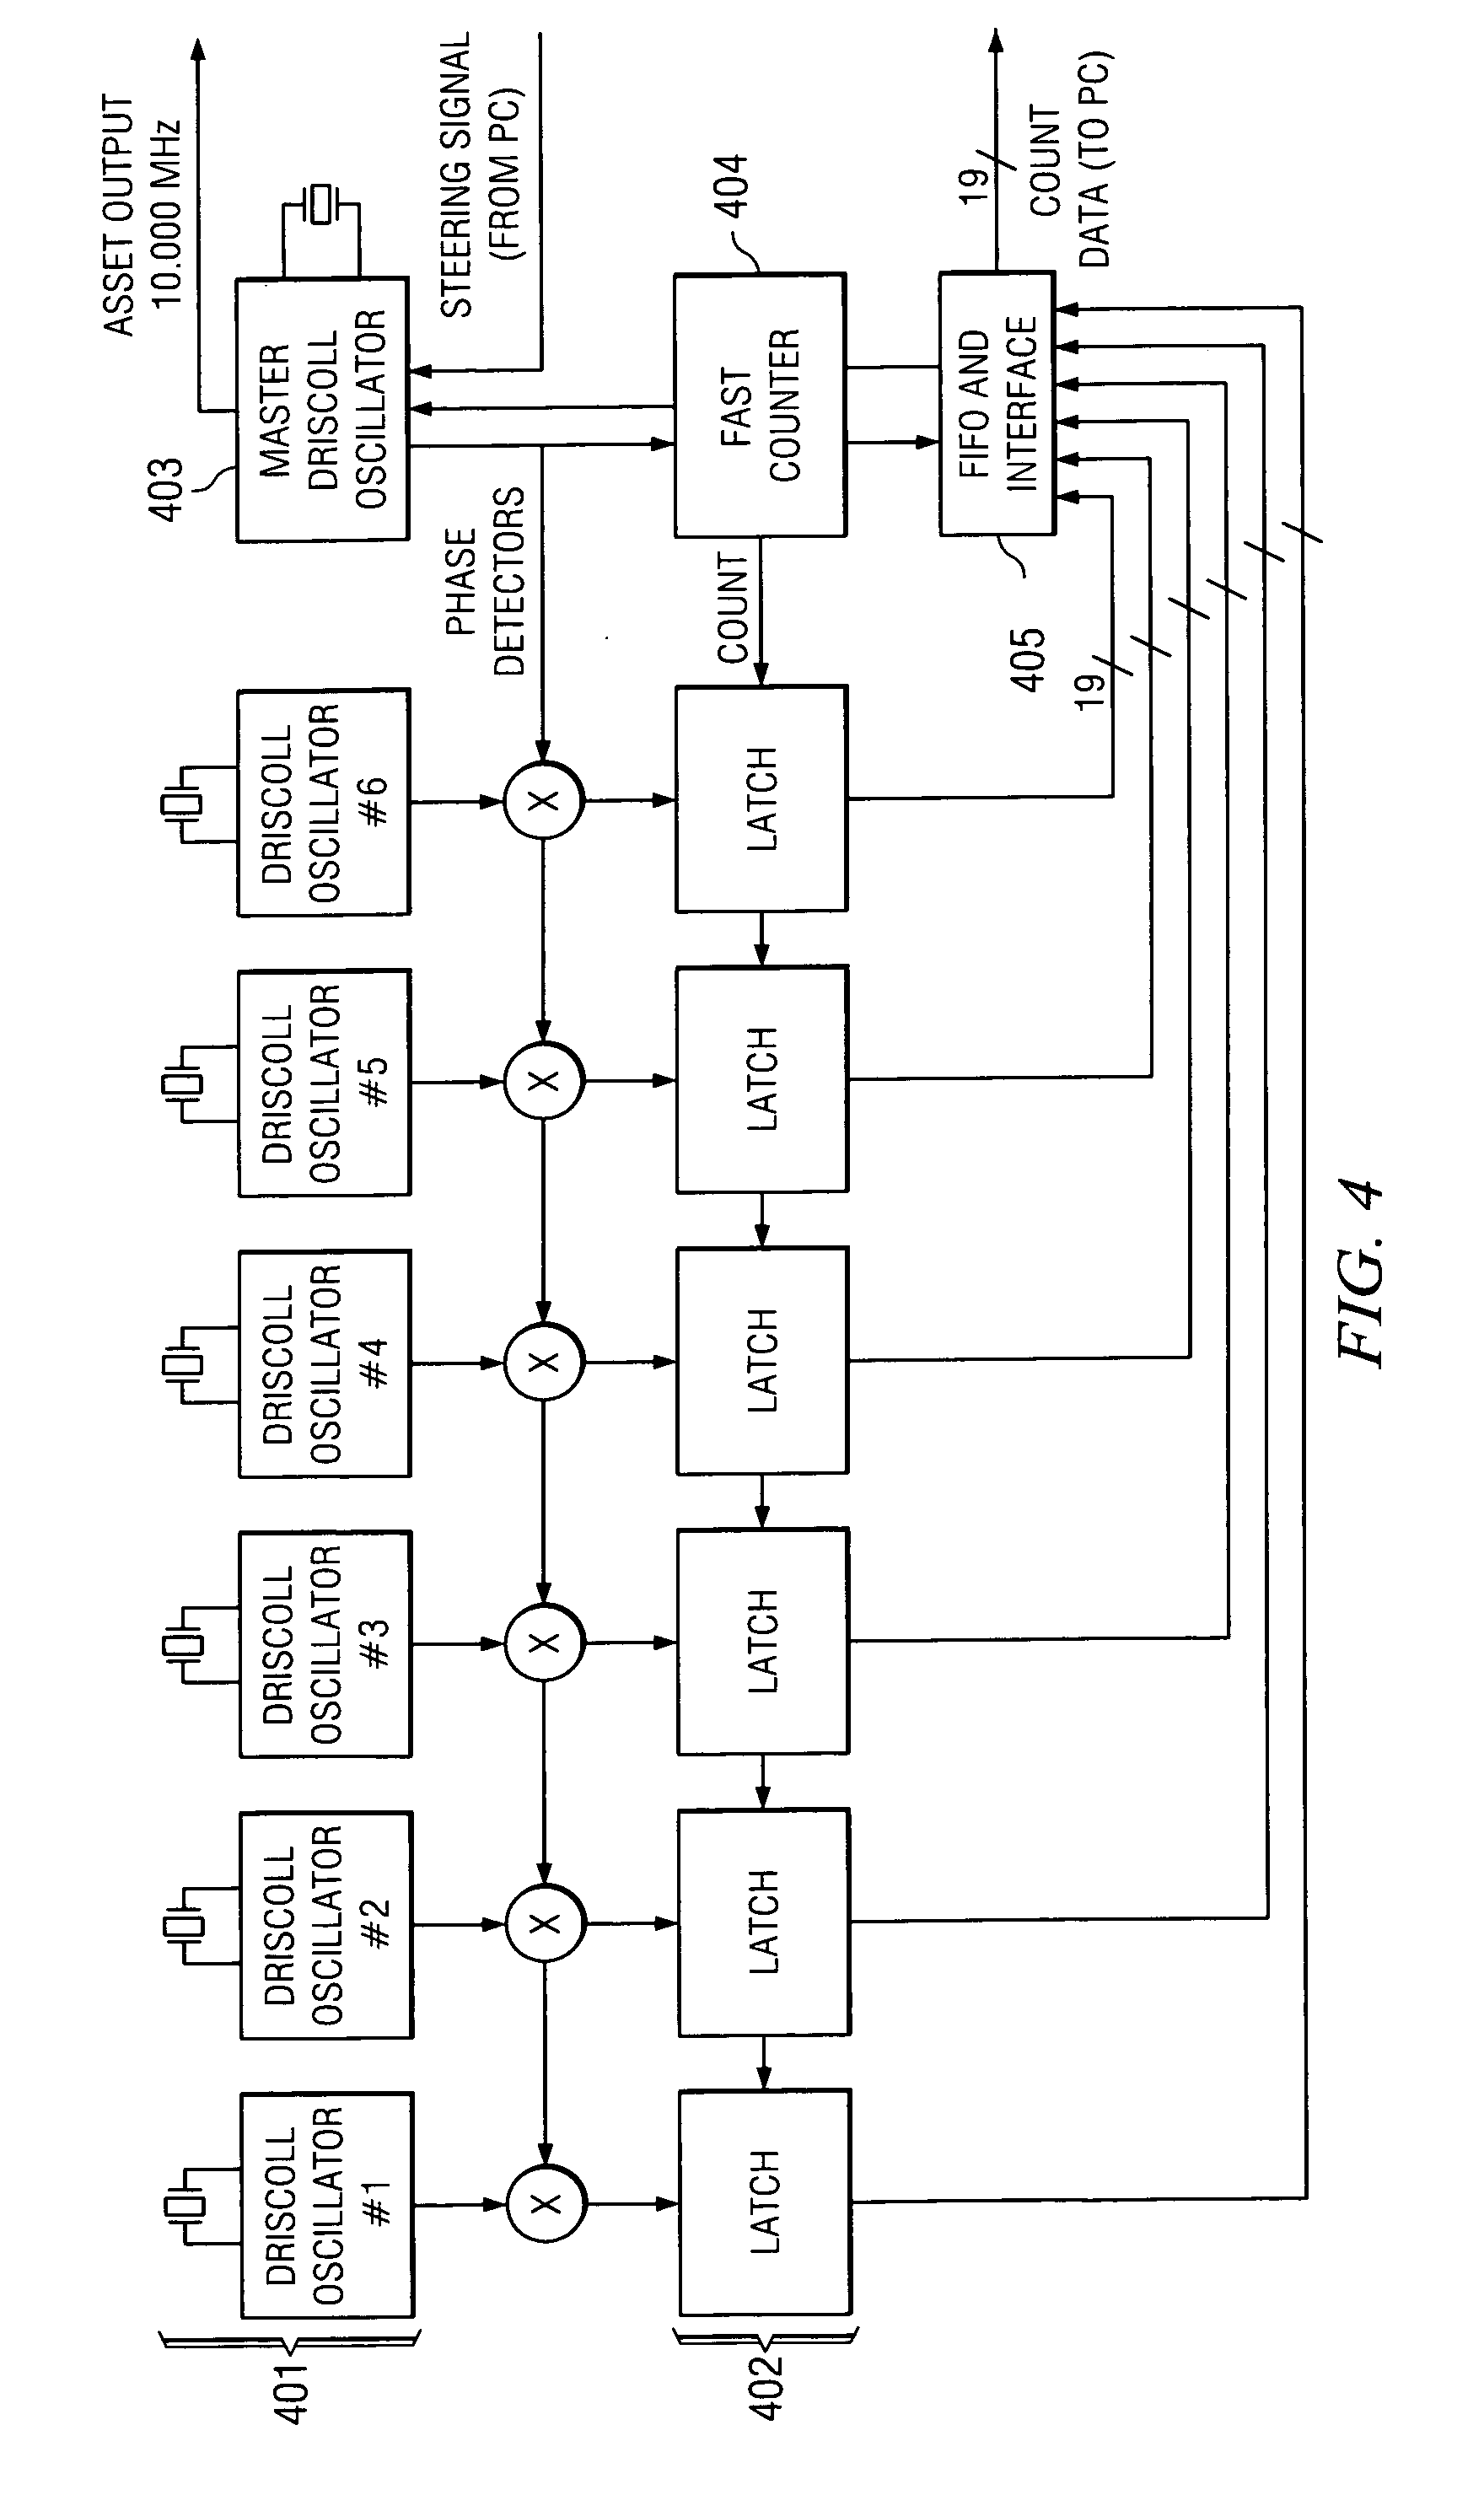 Robust low-frequency spread-spectrum navigation system